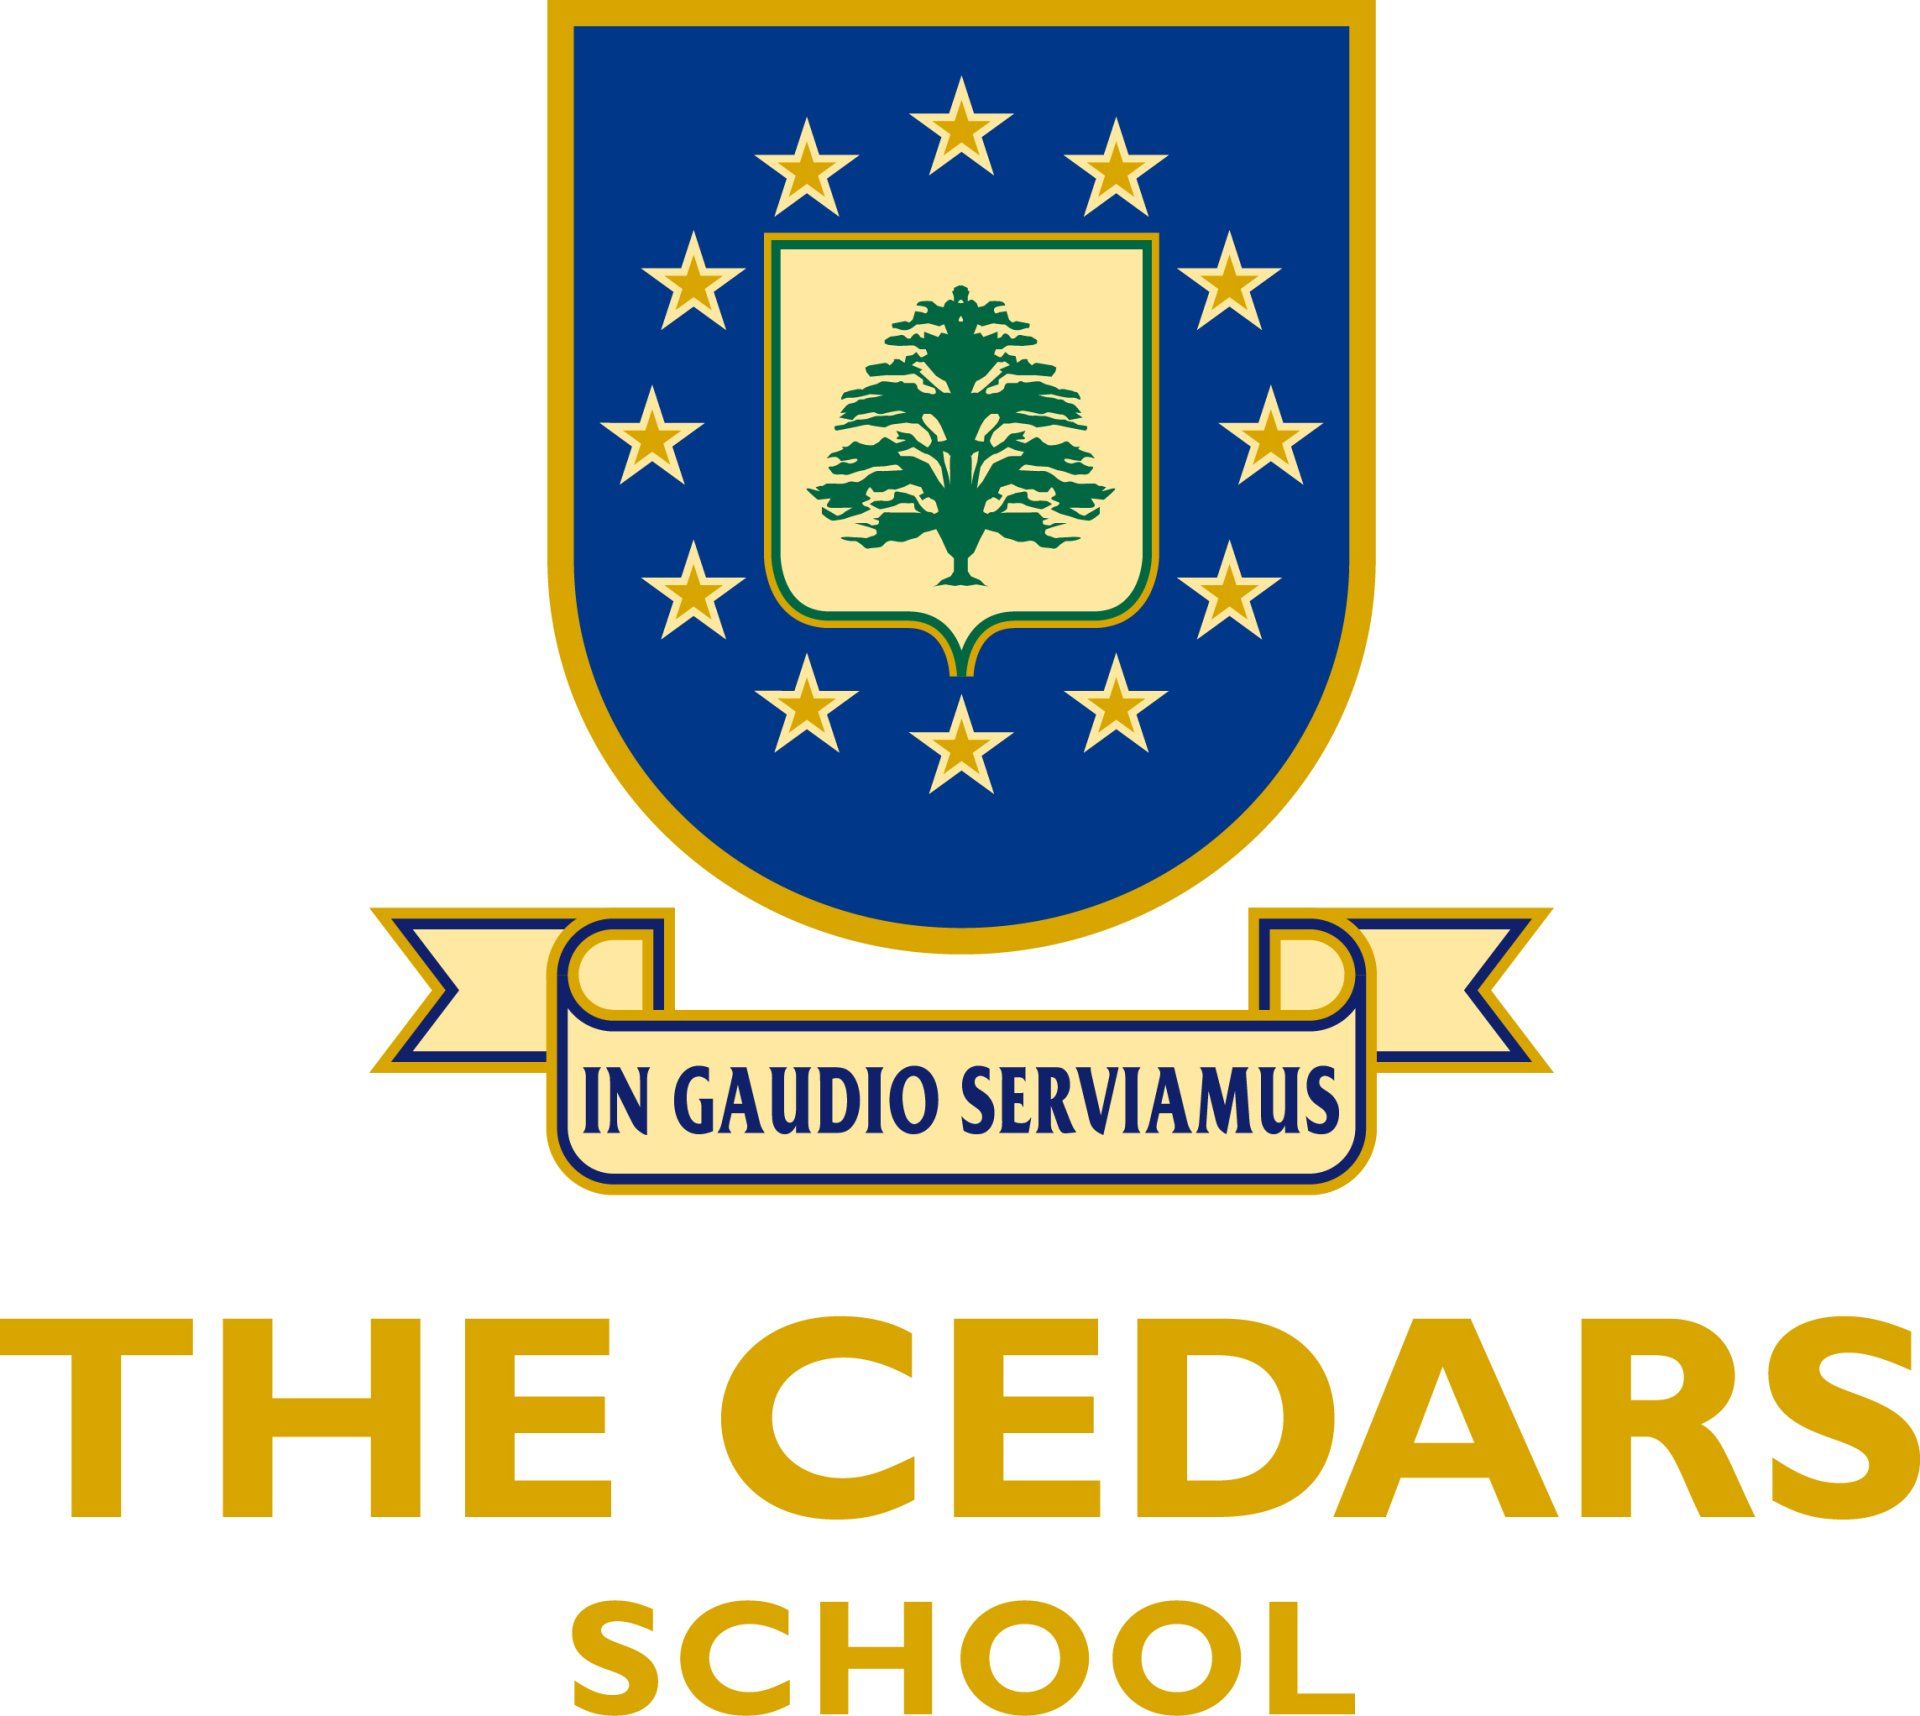 A logo for the cedars school with a tree on it